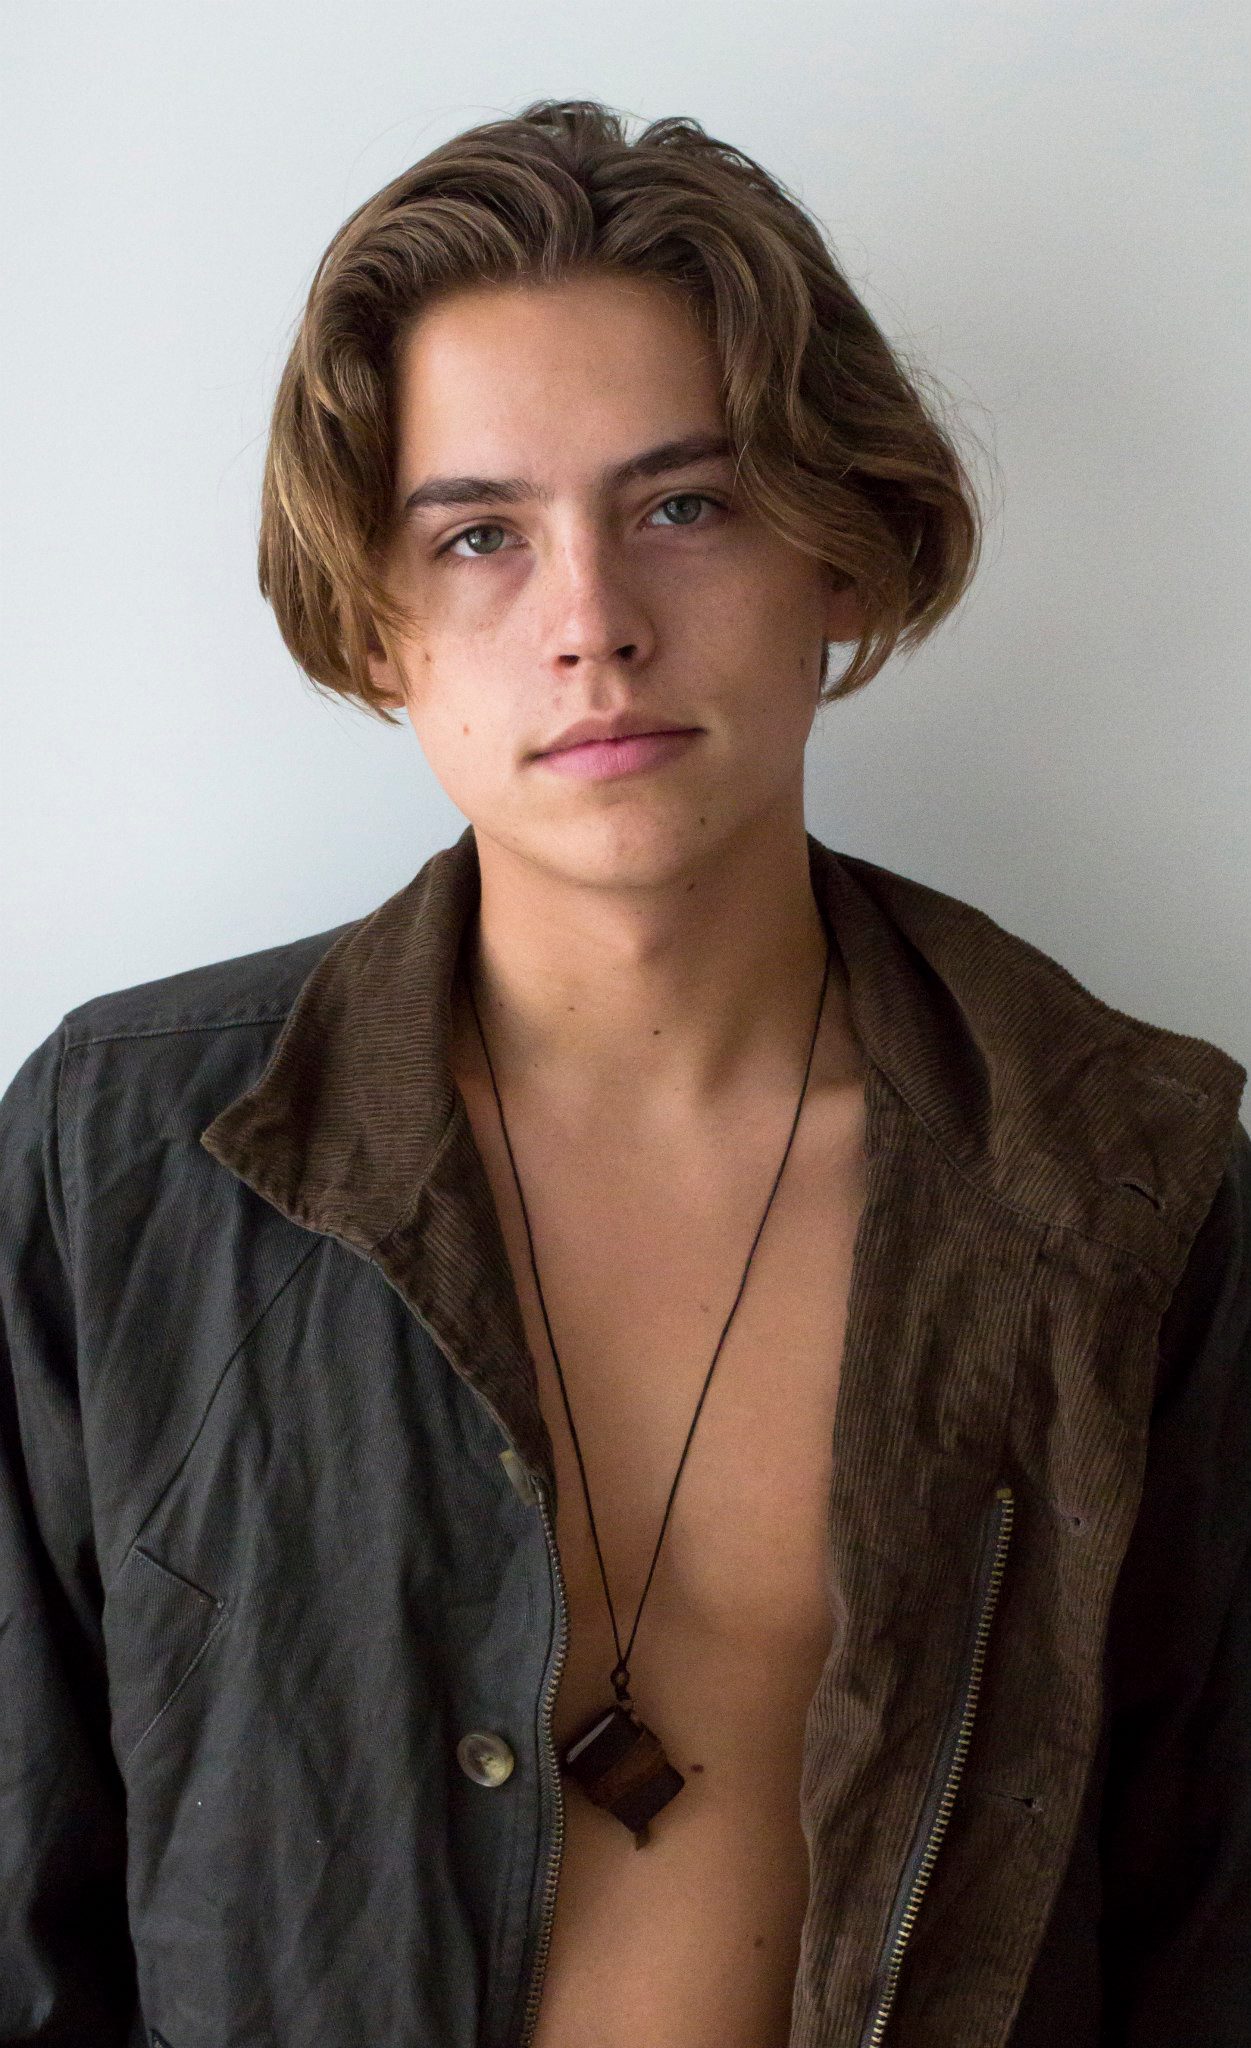 Cole Sprouse 2022 Hellblond Haar & unkonventionell Haarstil.
